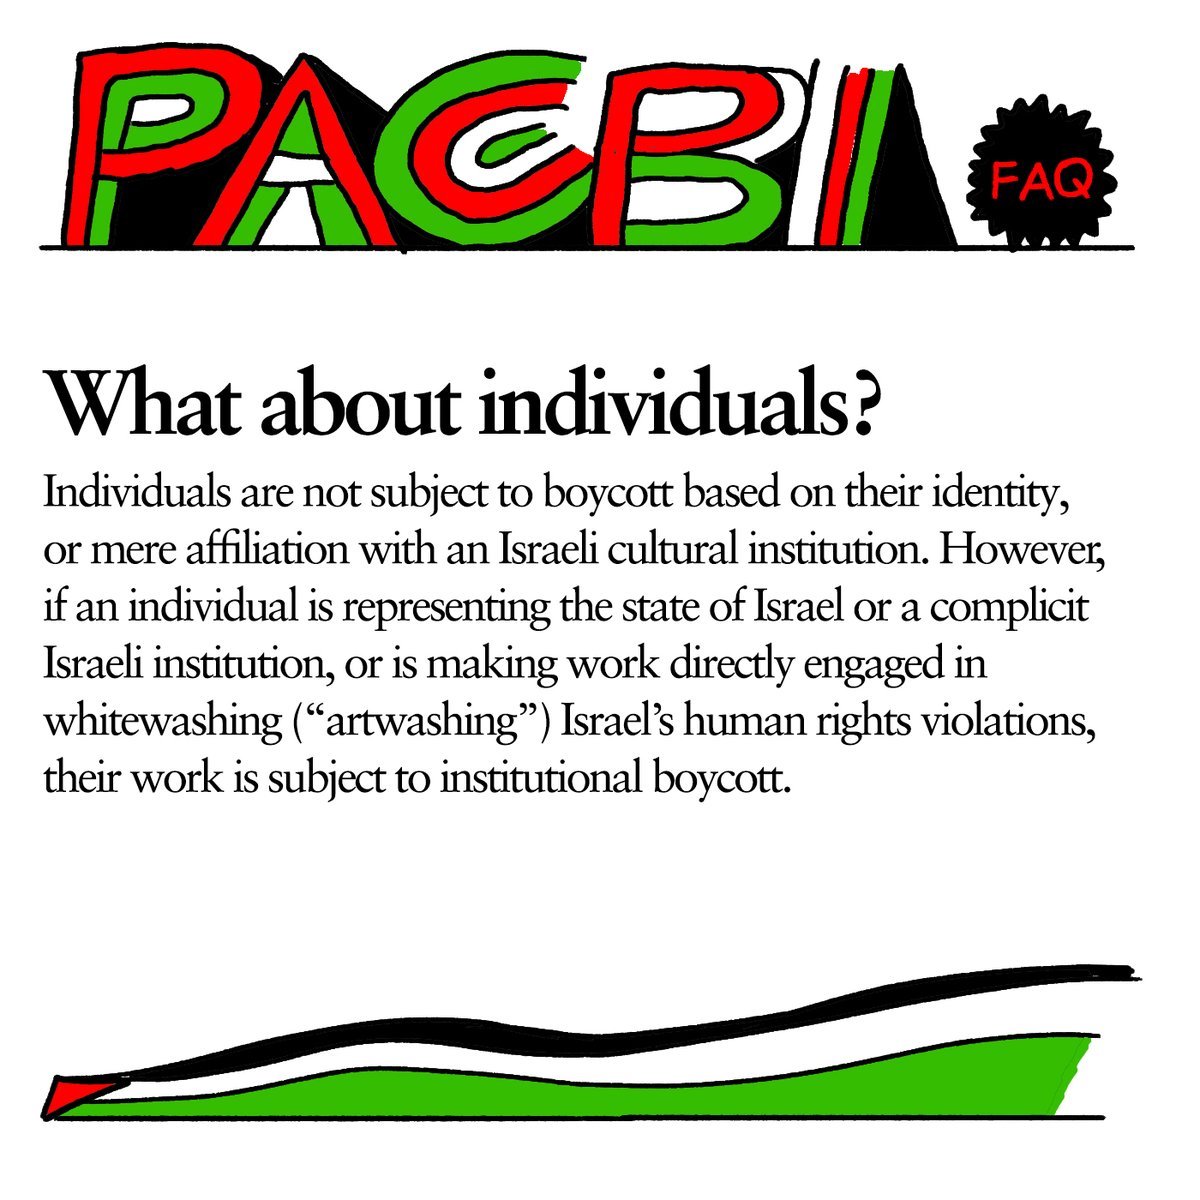 relatedly, Artists For Palestine created this run down of what PACBI is and isn't, and frequently asked questions around the guidelines (1/2)